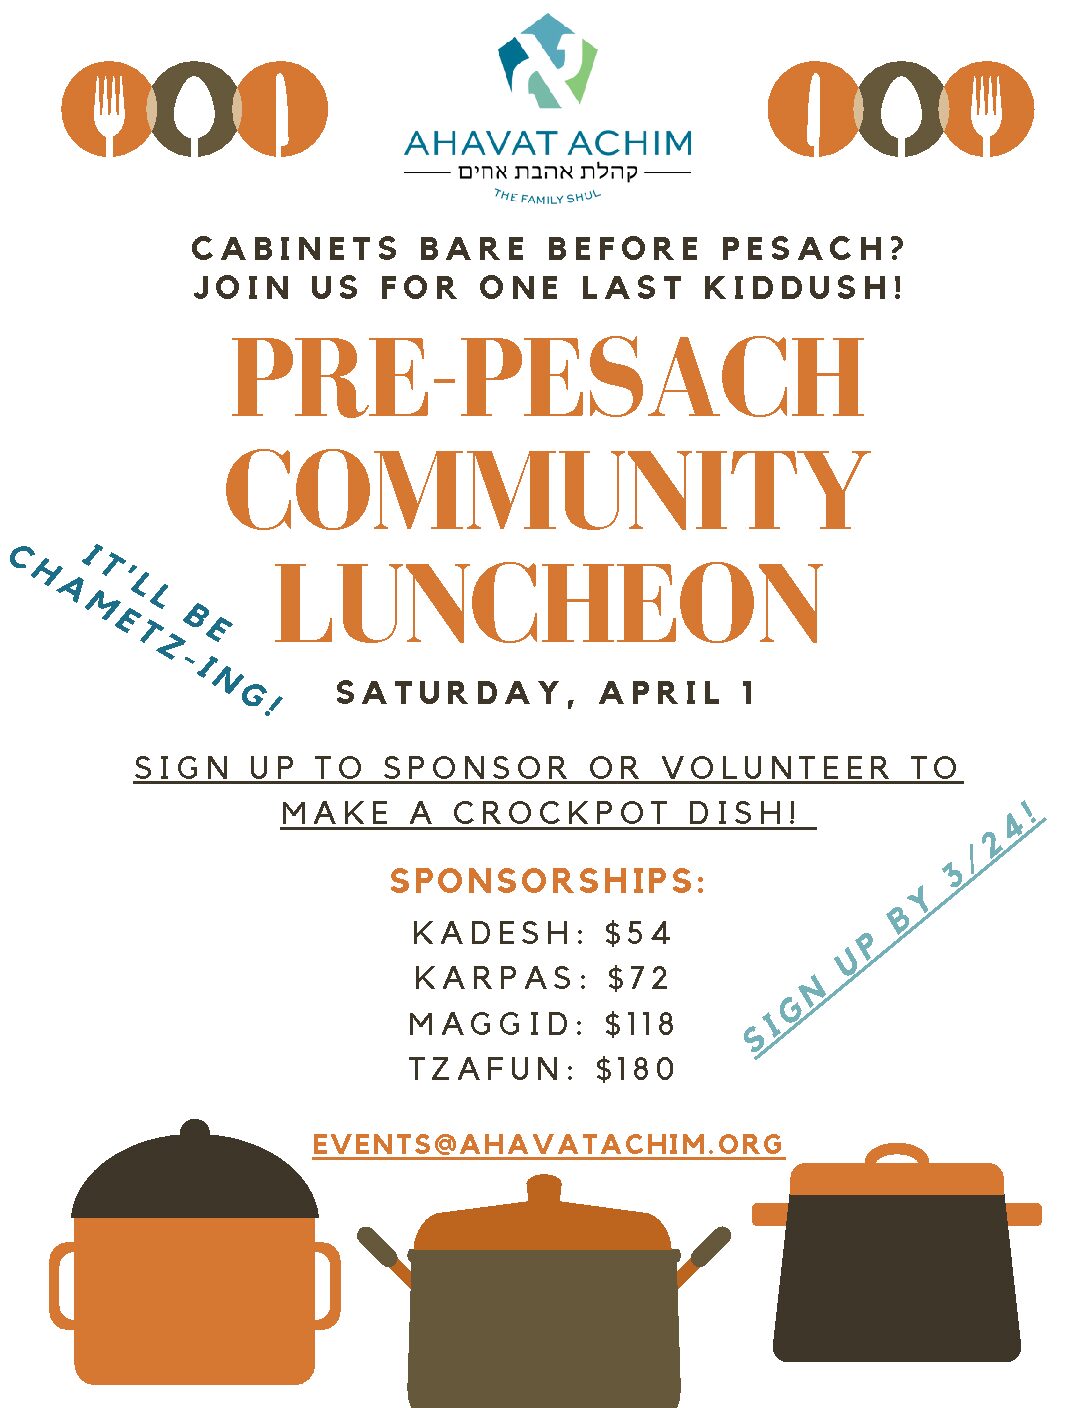 PRE-PESACH COMMUNITY LUNCHEON